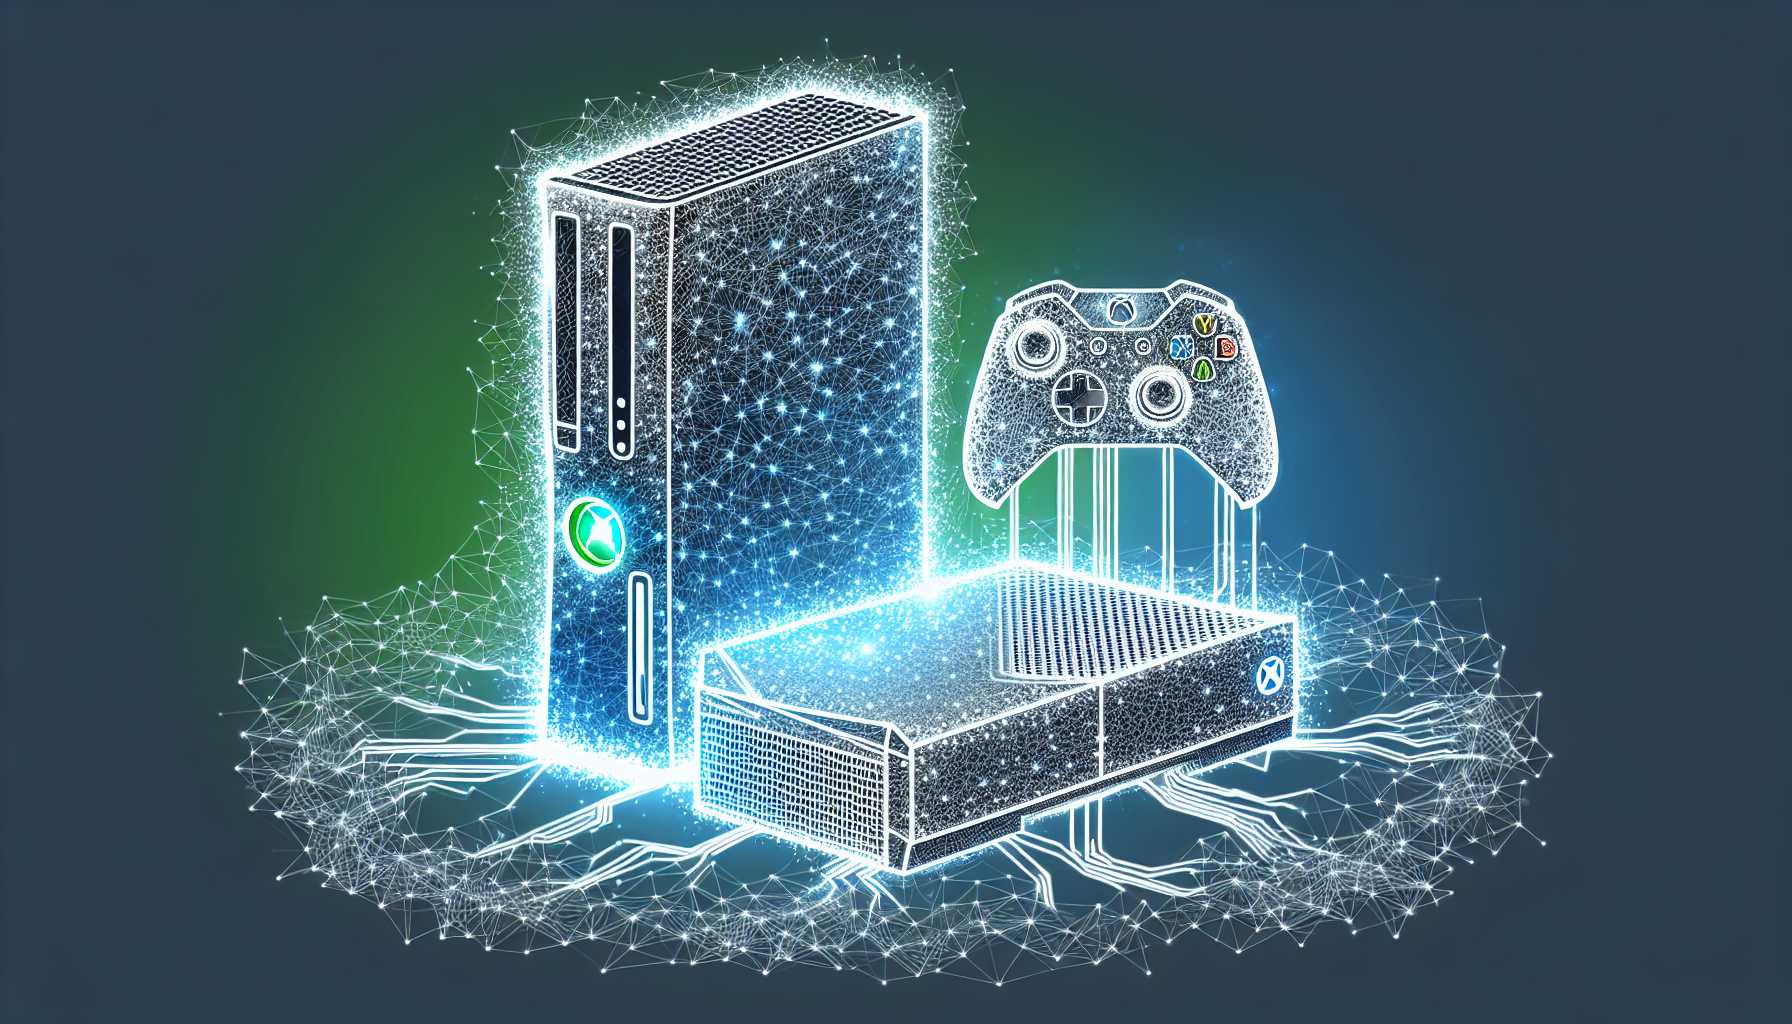 Xbox console overlaid with a digital mesh symbolizing integration with PC